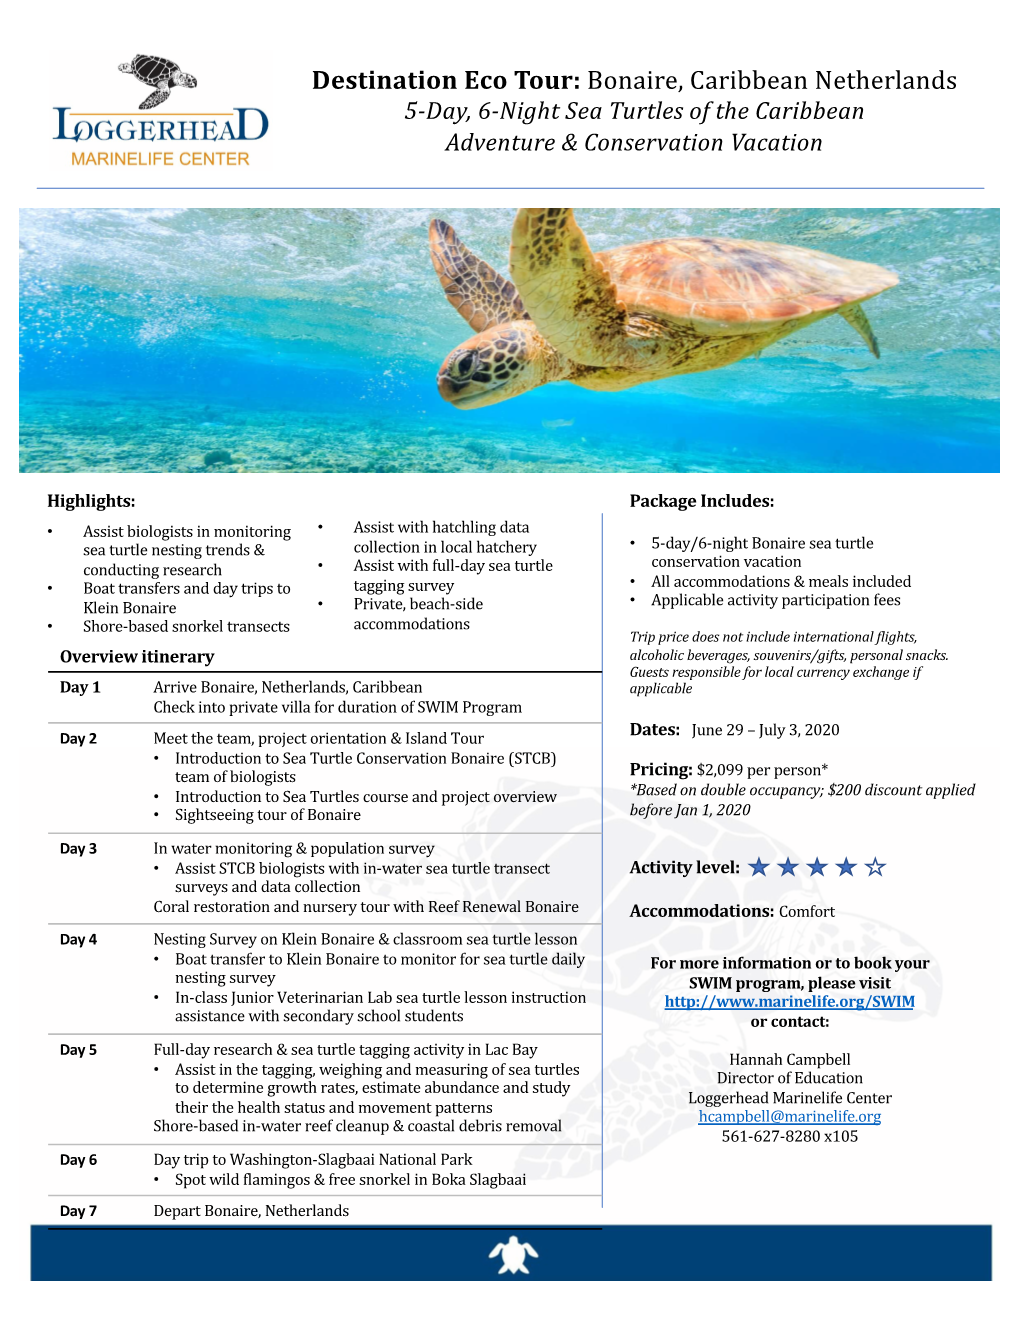 Bonaire, Caribbean Netherlands 5-Day, 6-Night Sea Turtles of the Caribbean Adventure & Conservation Vacation